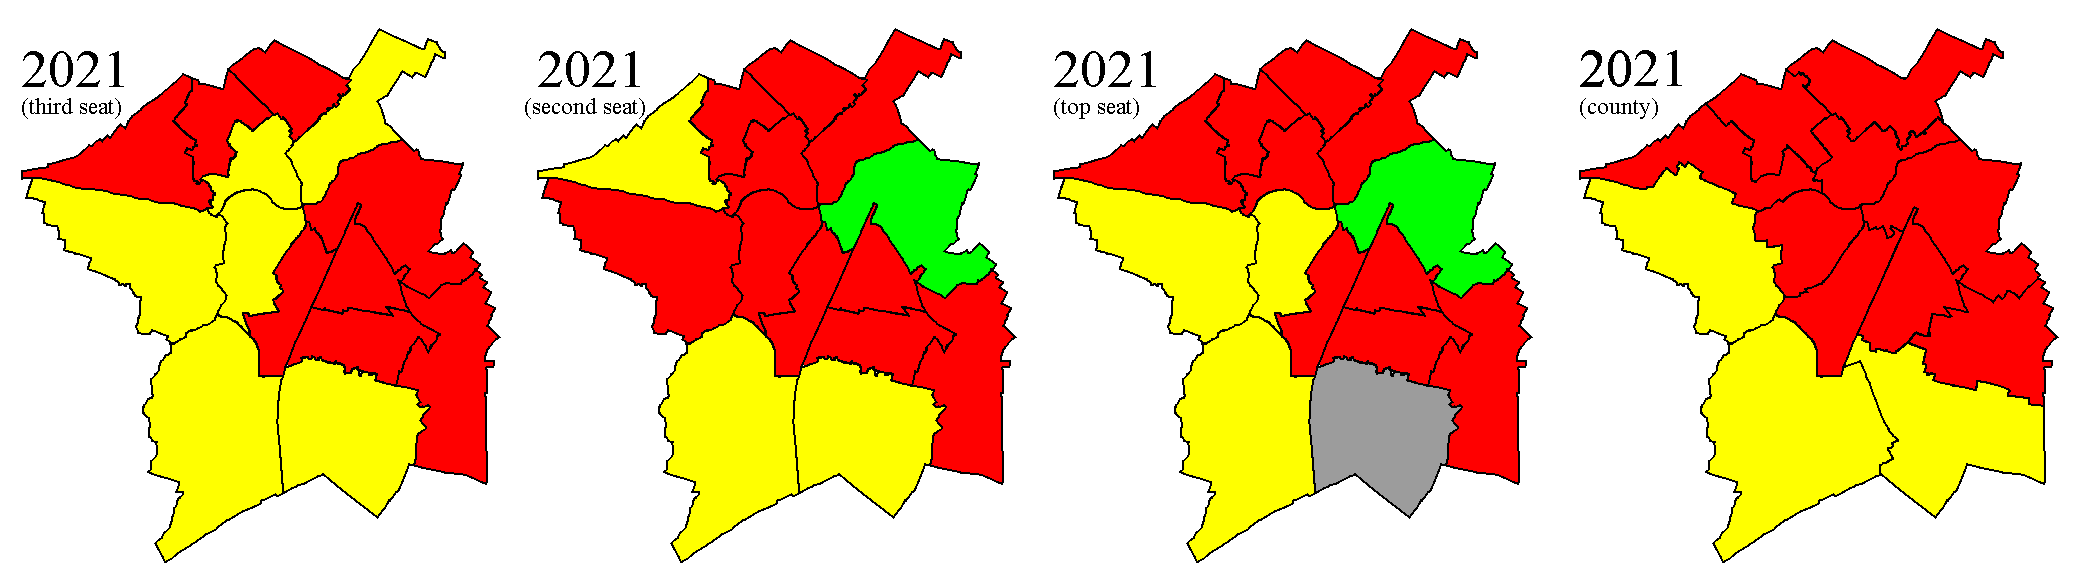 results 2021